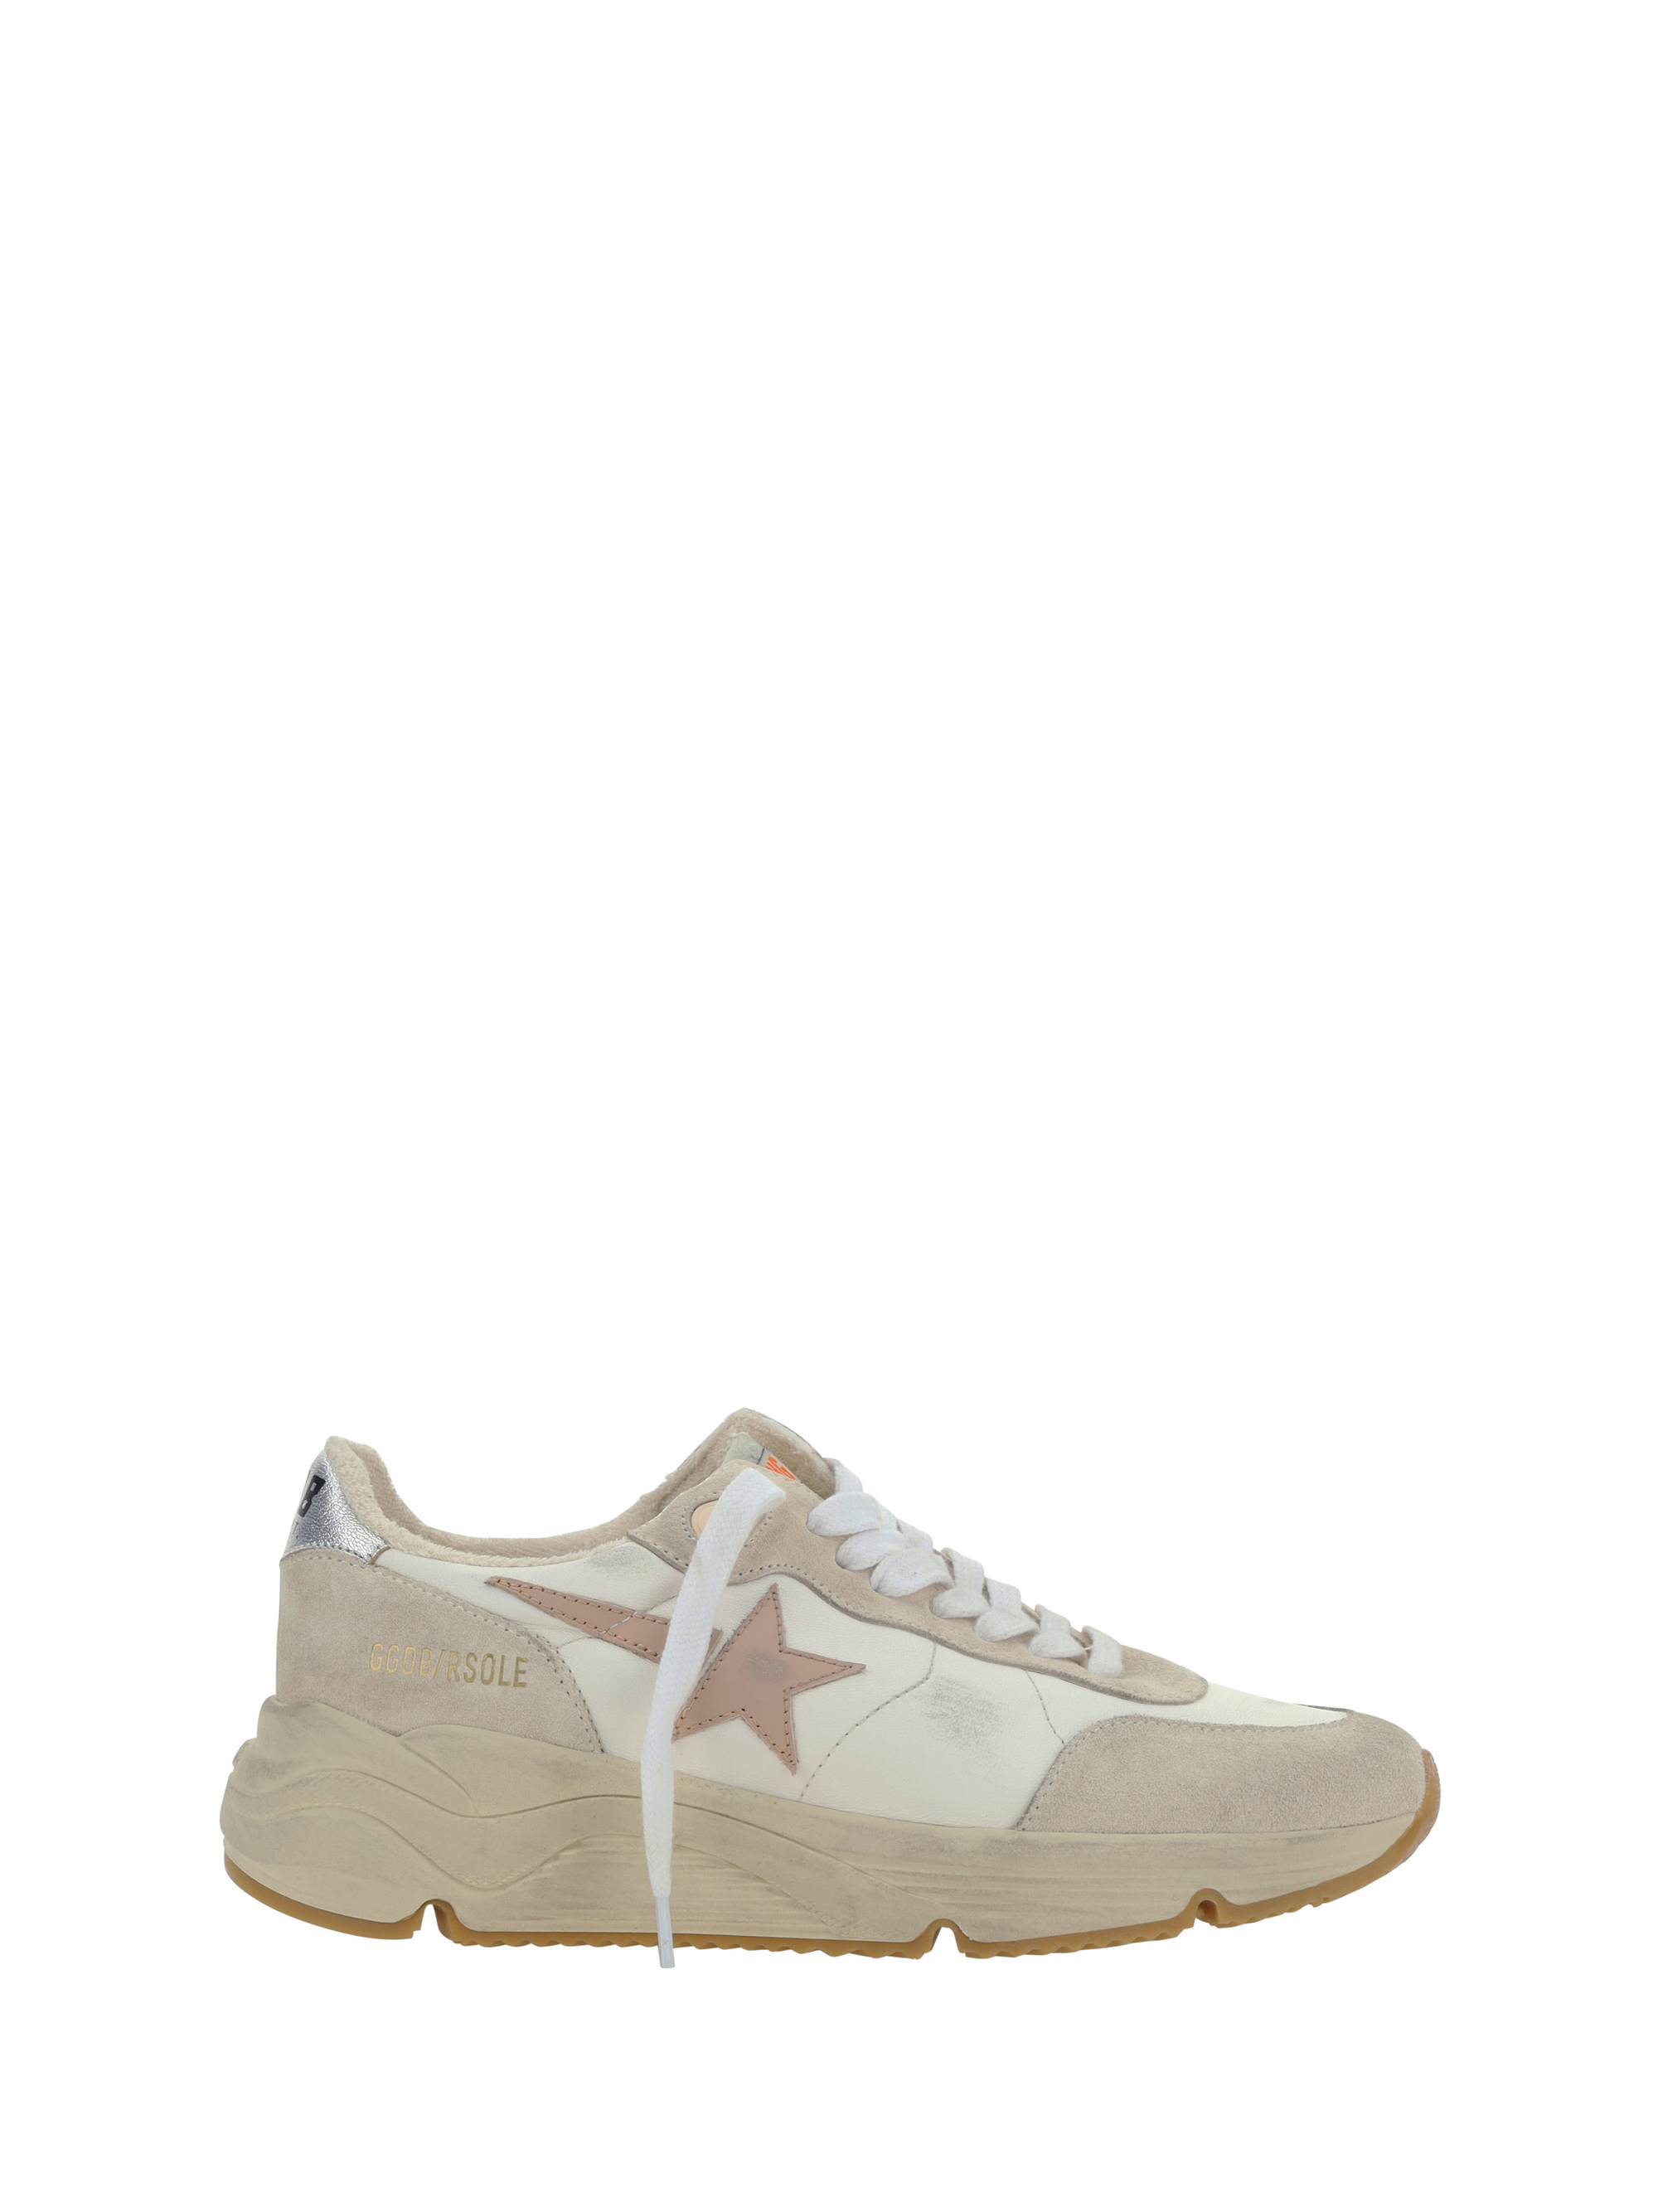 Shop Golden Goose Running Sole Sneakers In White/seedpearl/silver